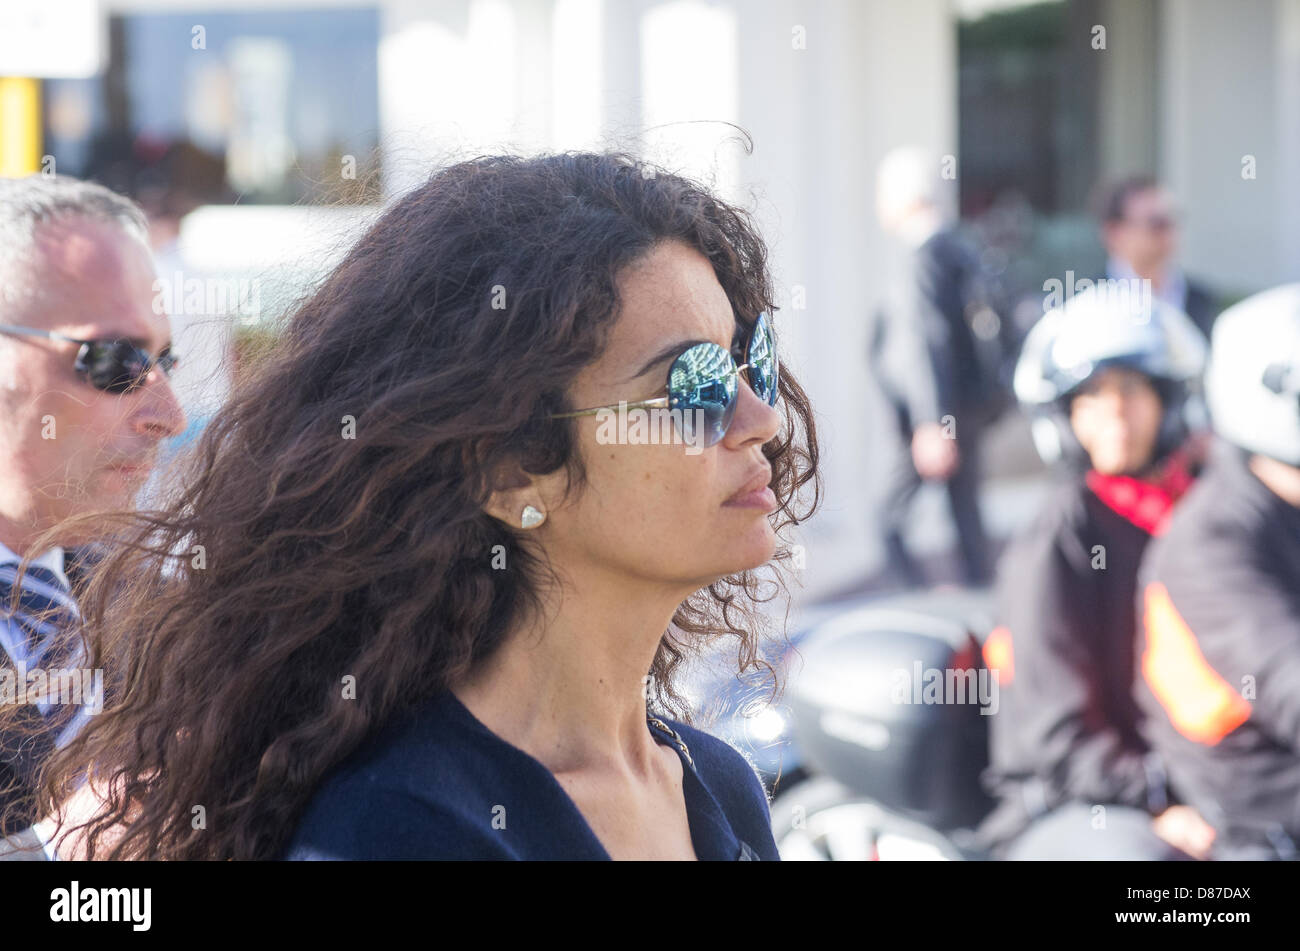 Cannes, France. 19th May 2013. tunisian model Afef Jnifen Tronchetti Provera  is spotted near hotel Martinez in Cannes, France. Credit:  jonatha borzicchi editorial / Alamy Live News Stock Photo